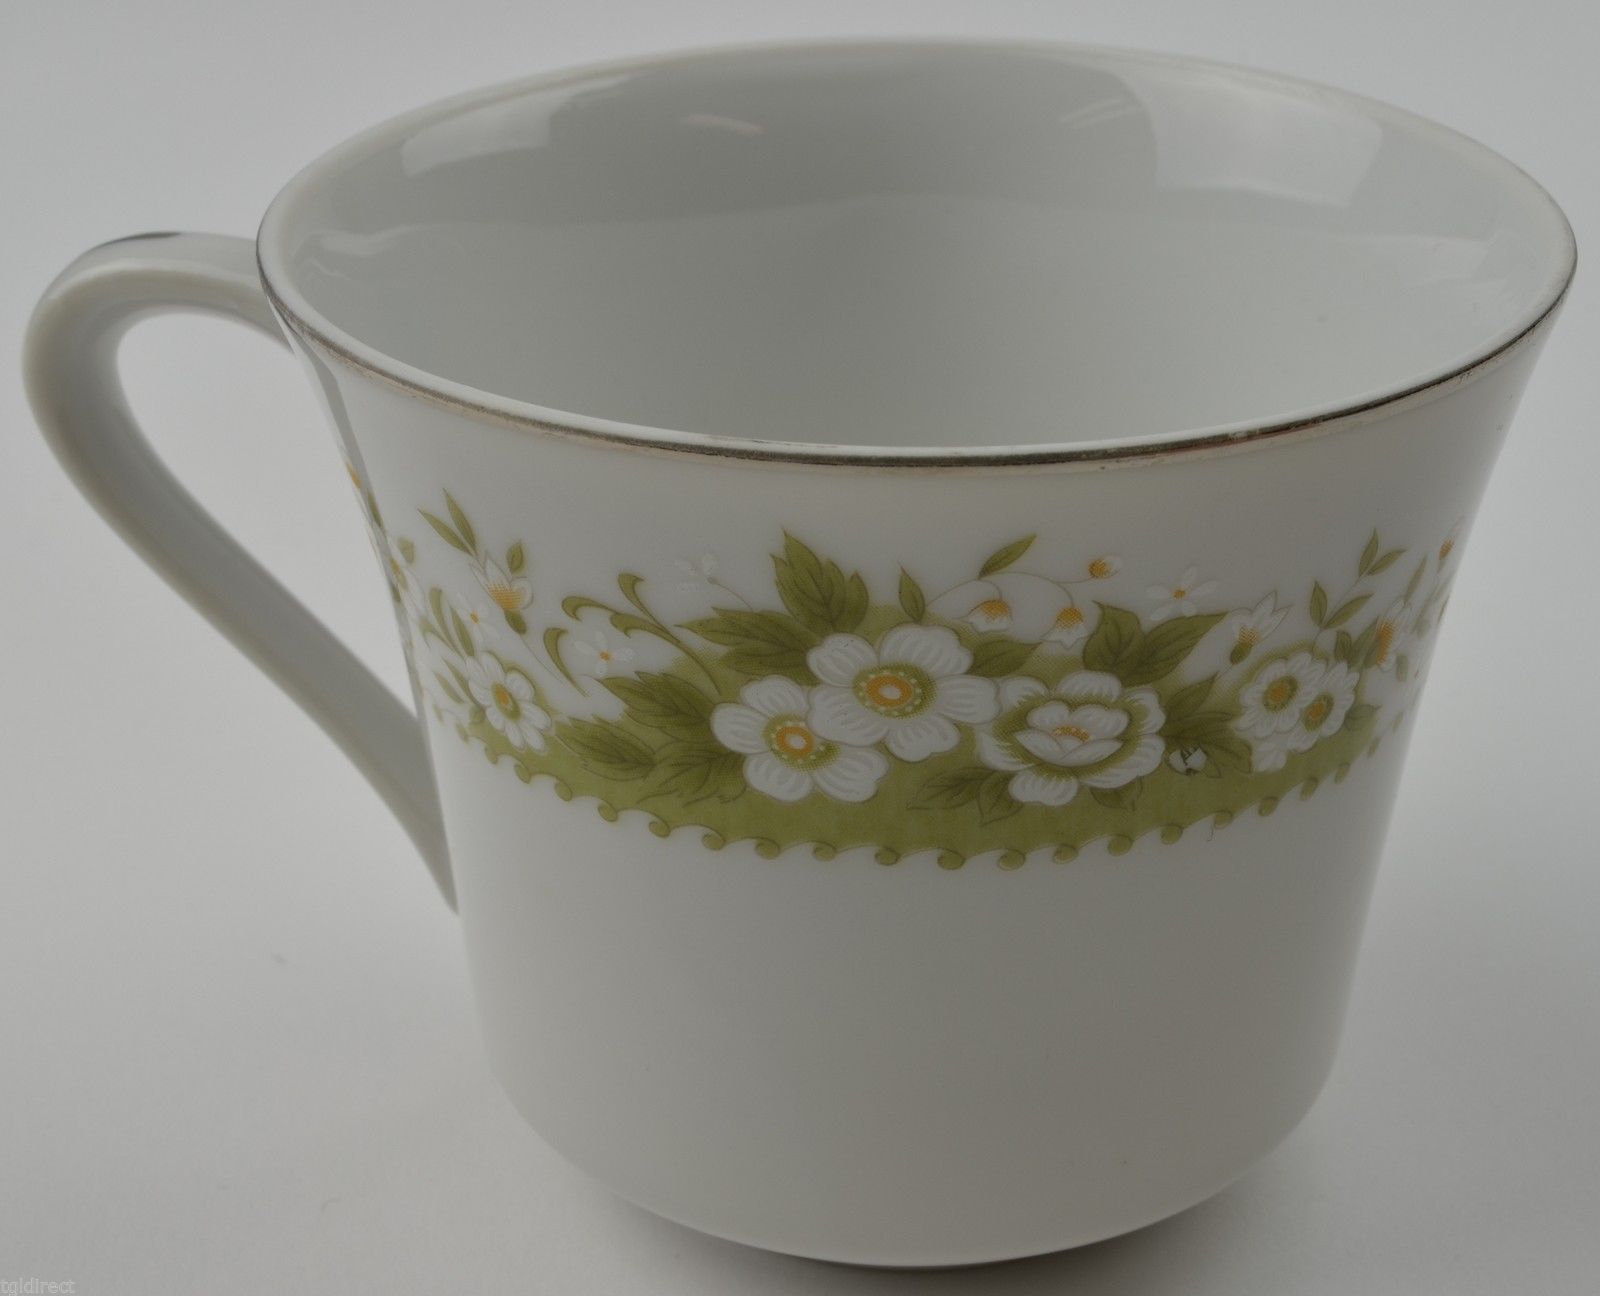 Primary image for Wellin Fine China Glendale Pattern Flat Cup 5756 Teacup Replacement Tableware